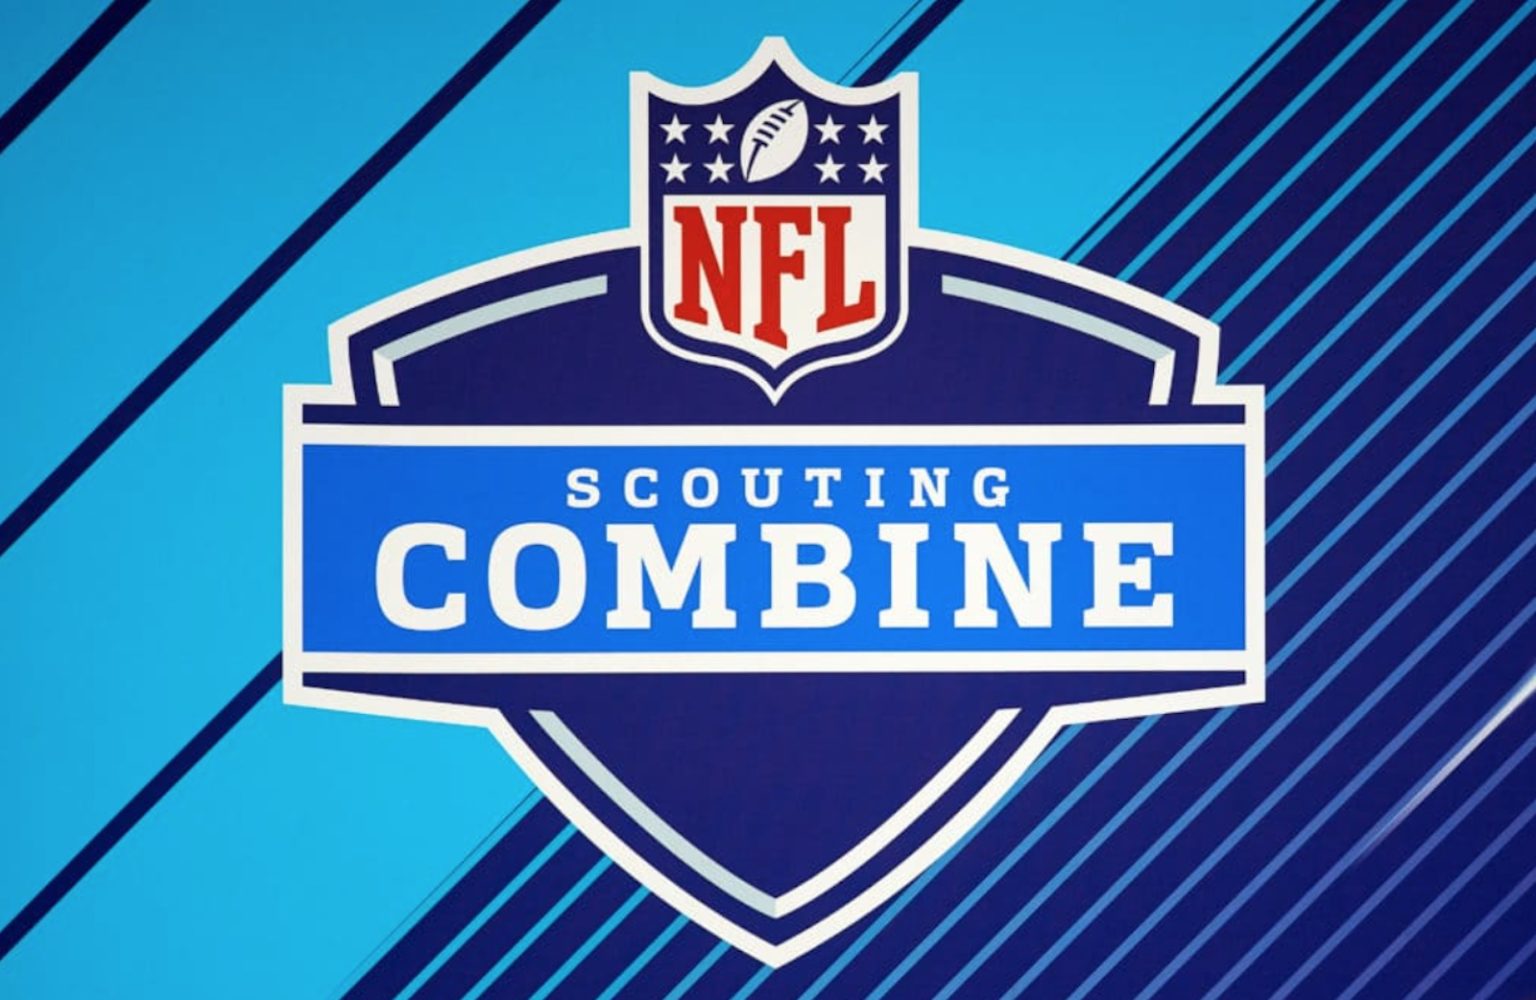 NFL Scouting Combine could leave Indianapolis for 2023